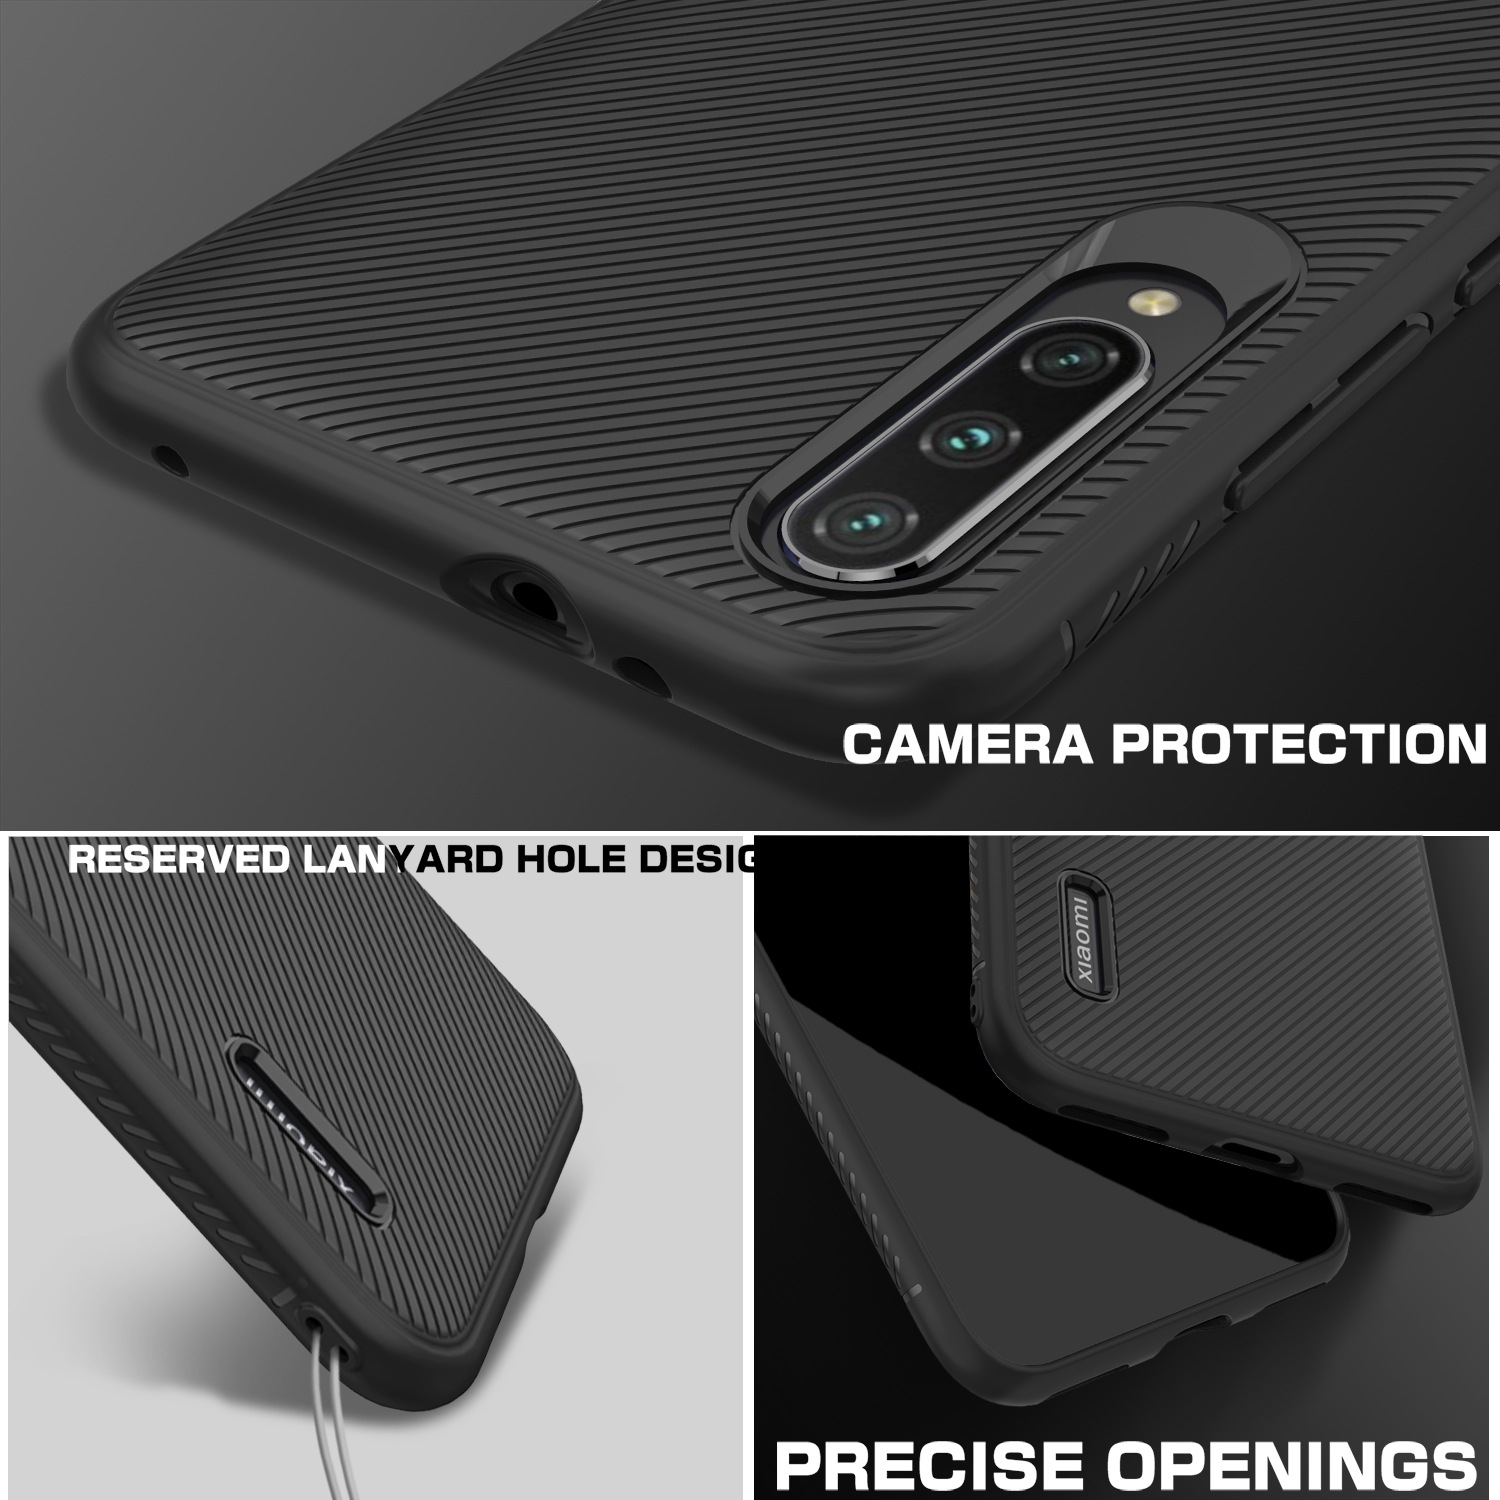 Bakeey-Carbon-Fiber-Texture-Slim-Soft-Silicone-Shockproof-Protective-Case-for-Xiaomi-Mi-A3--Xiaomi-M-1593009-2